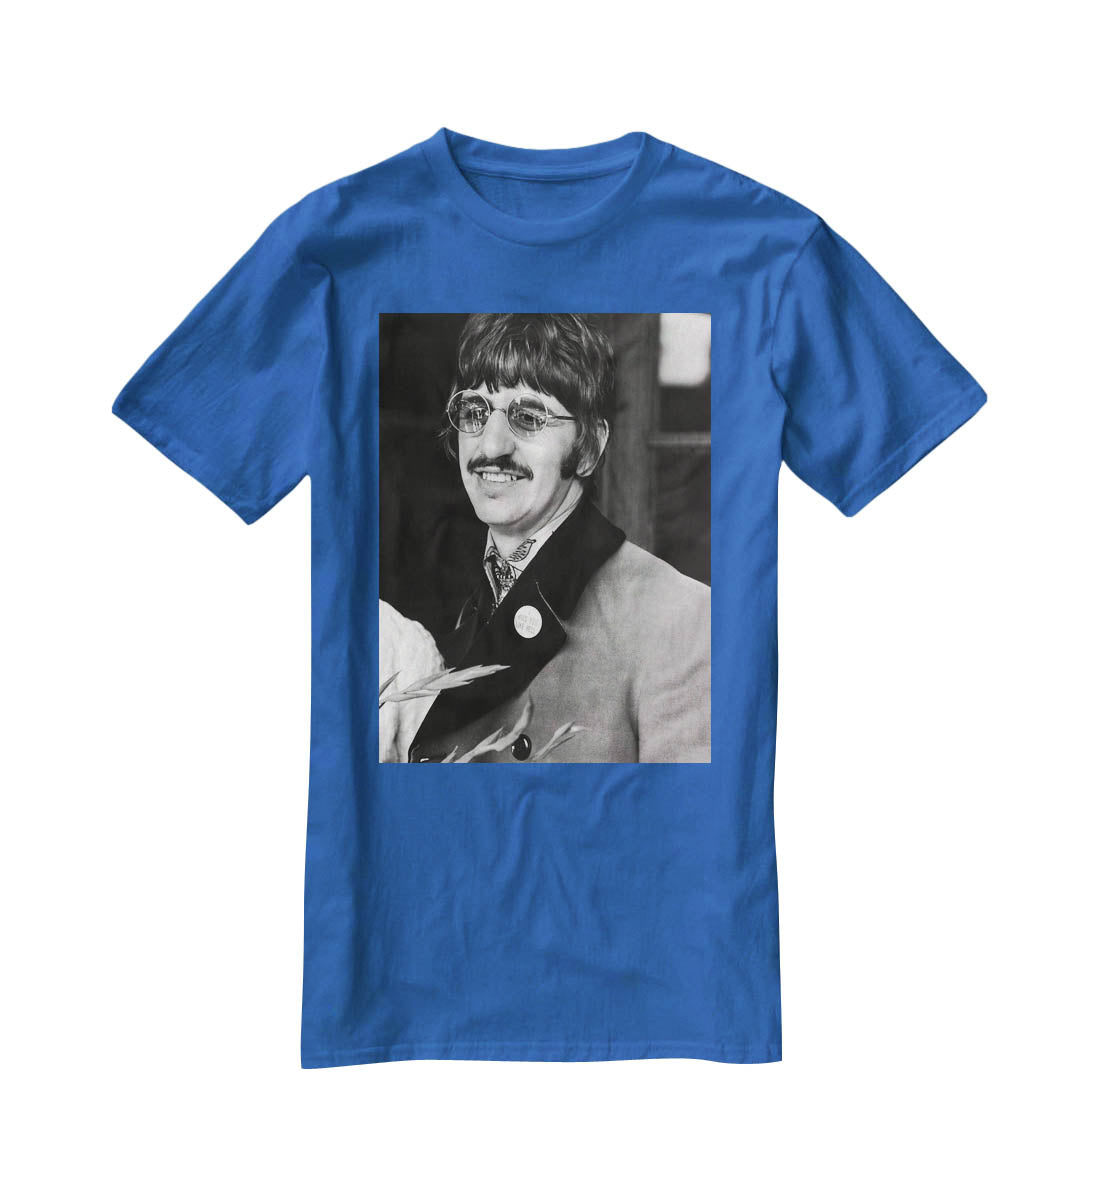 Ringo Starr of The Beatles in 1967 T-Shirt - Canvas Art Rocks - 2